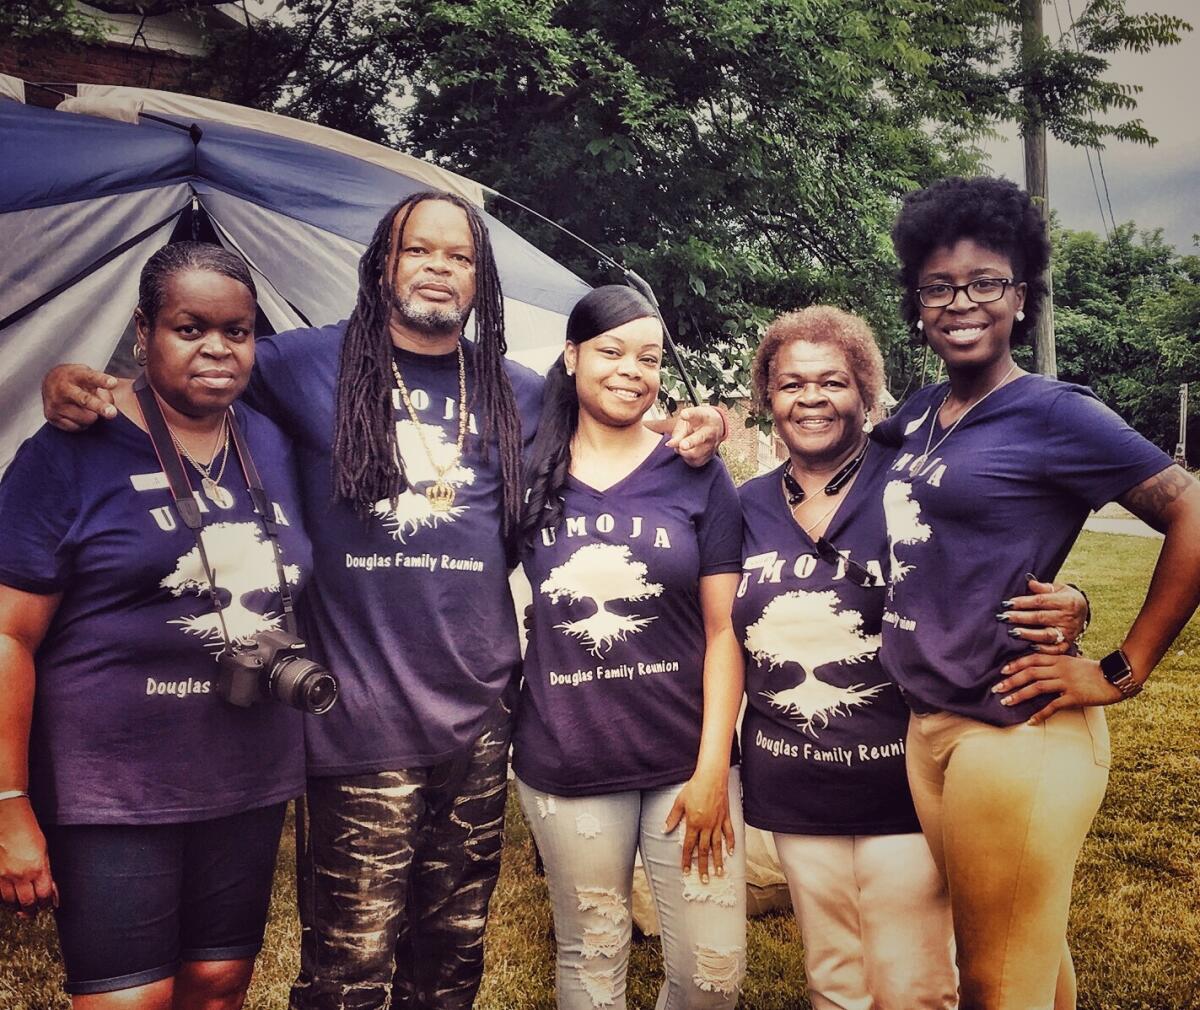 D'Neika Lopez, right, at a family reunion in Tennessee in 2018.